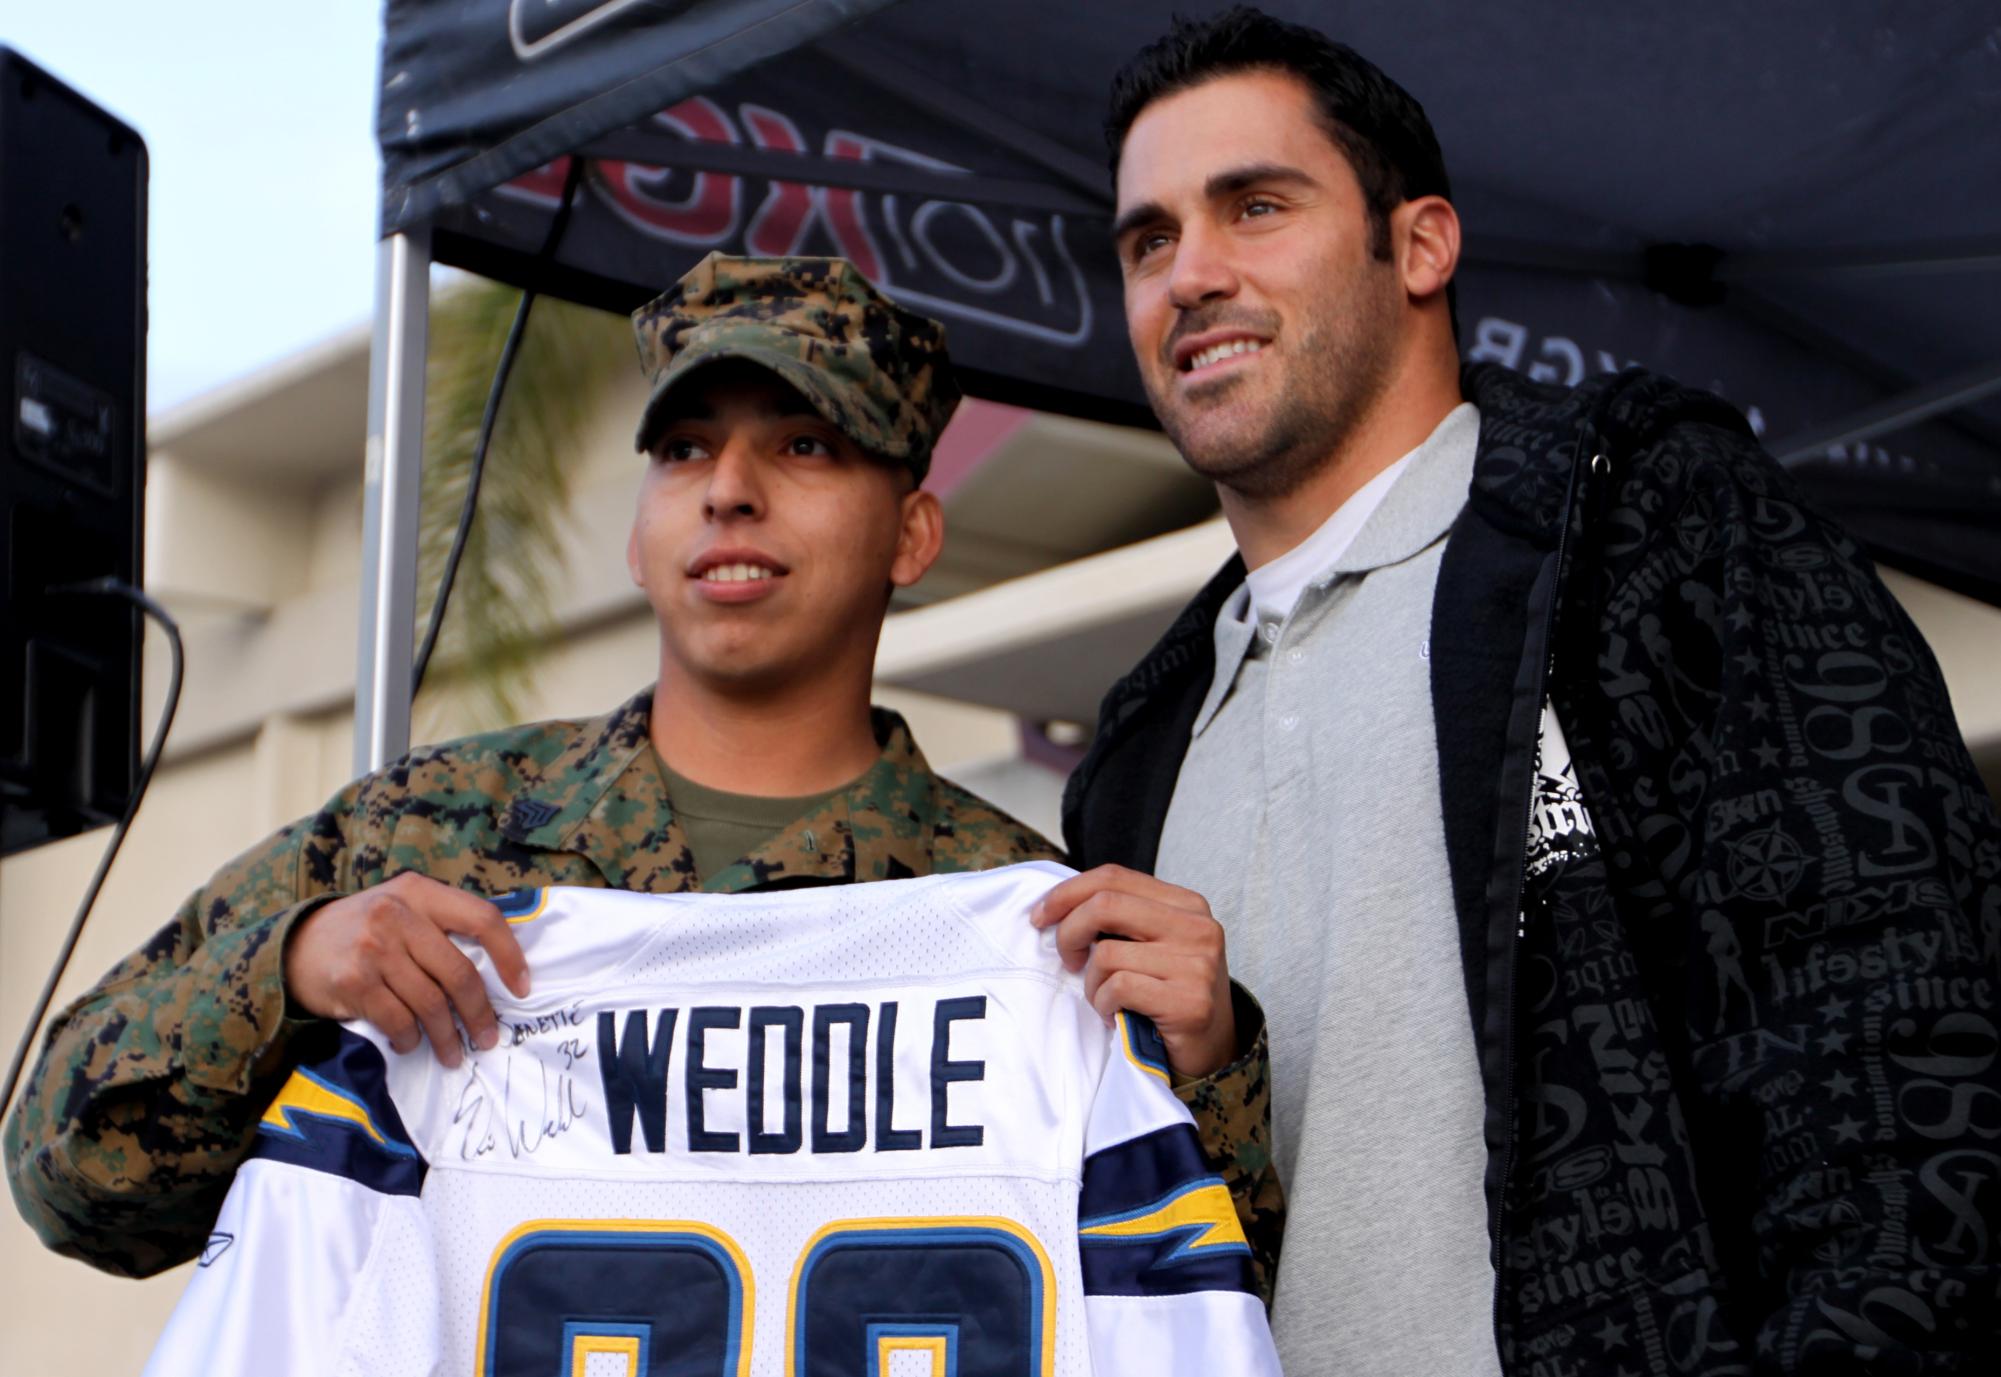 Eric Weddle on X: Guess who's back!!!!!!!!!! WORLD CHAMPION